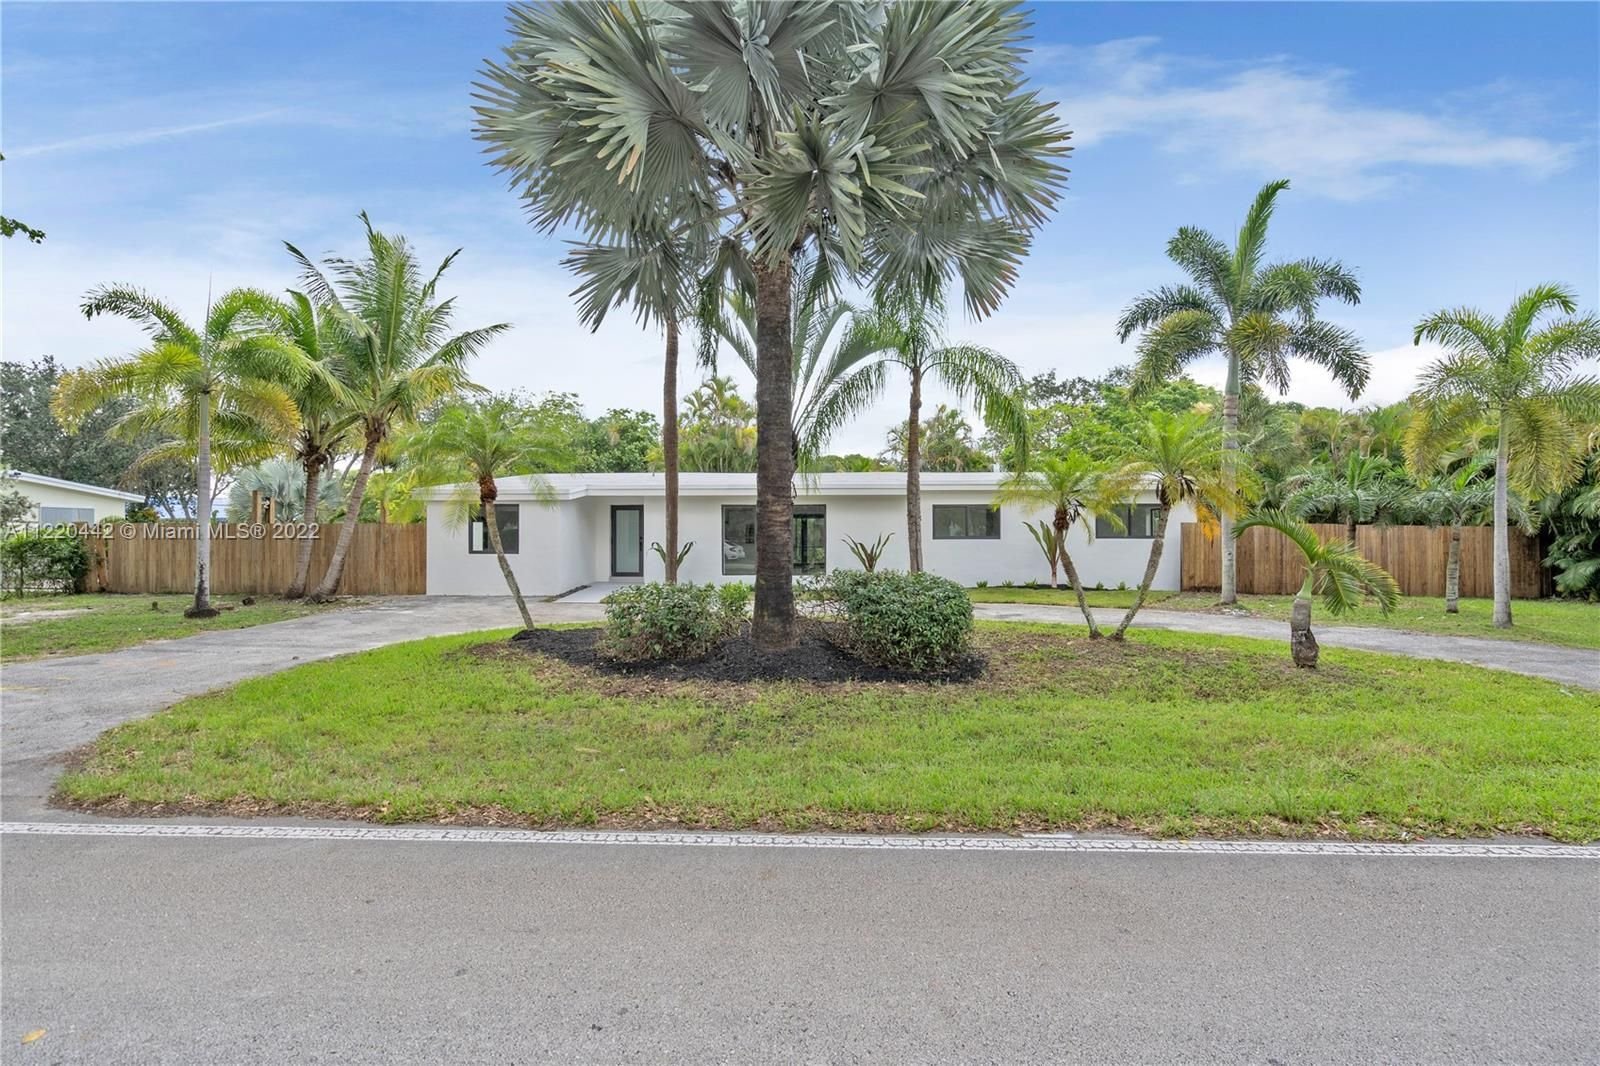 Real estate property located at 9401 82nd Ave, Miami-Dade County, Miami, FL